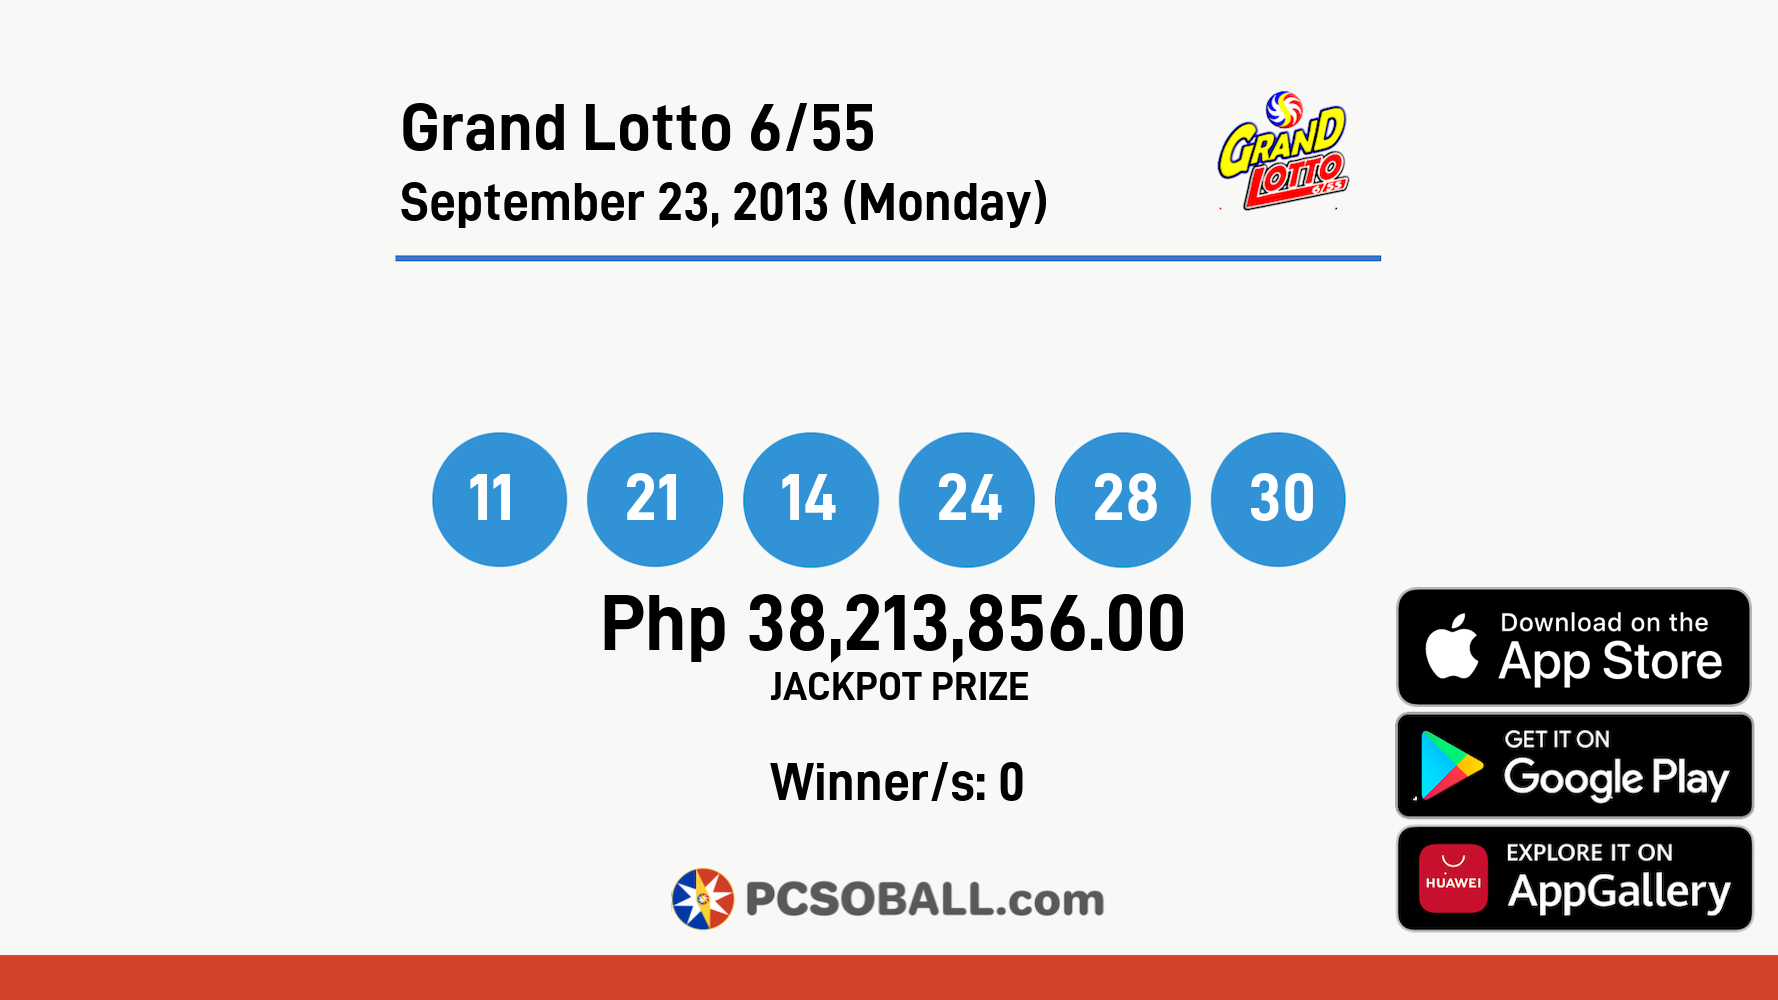 Grand Lotto 6/55 September 23, 2013 (Monday) Result